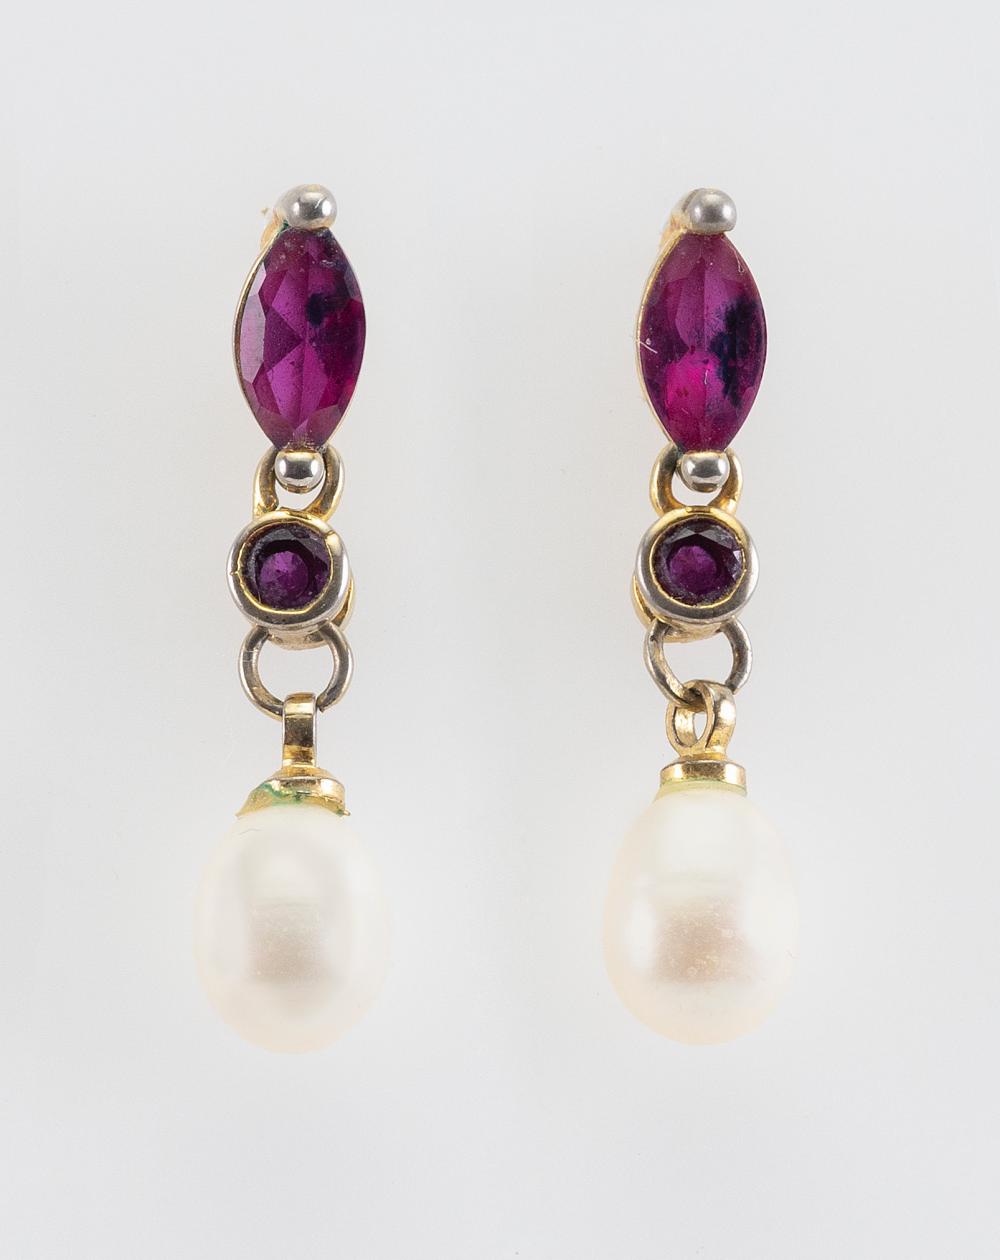 PAIR OF GOLD RUBY AND CULTURED 34cf22